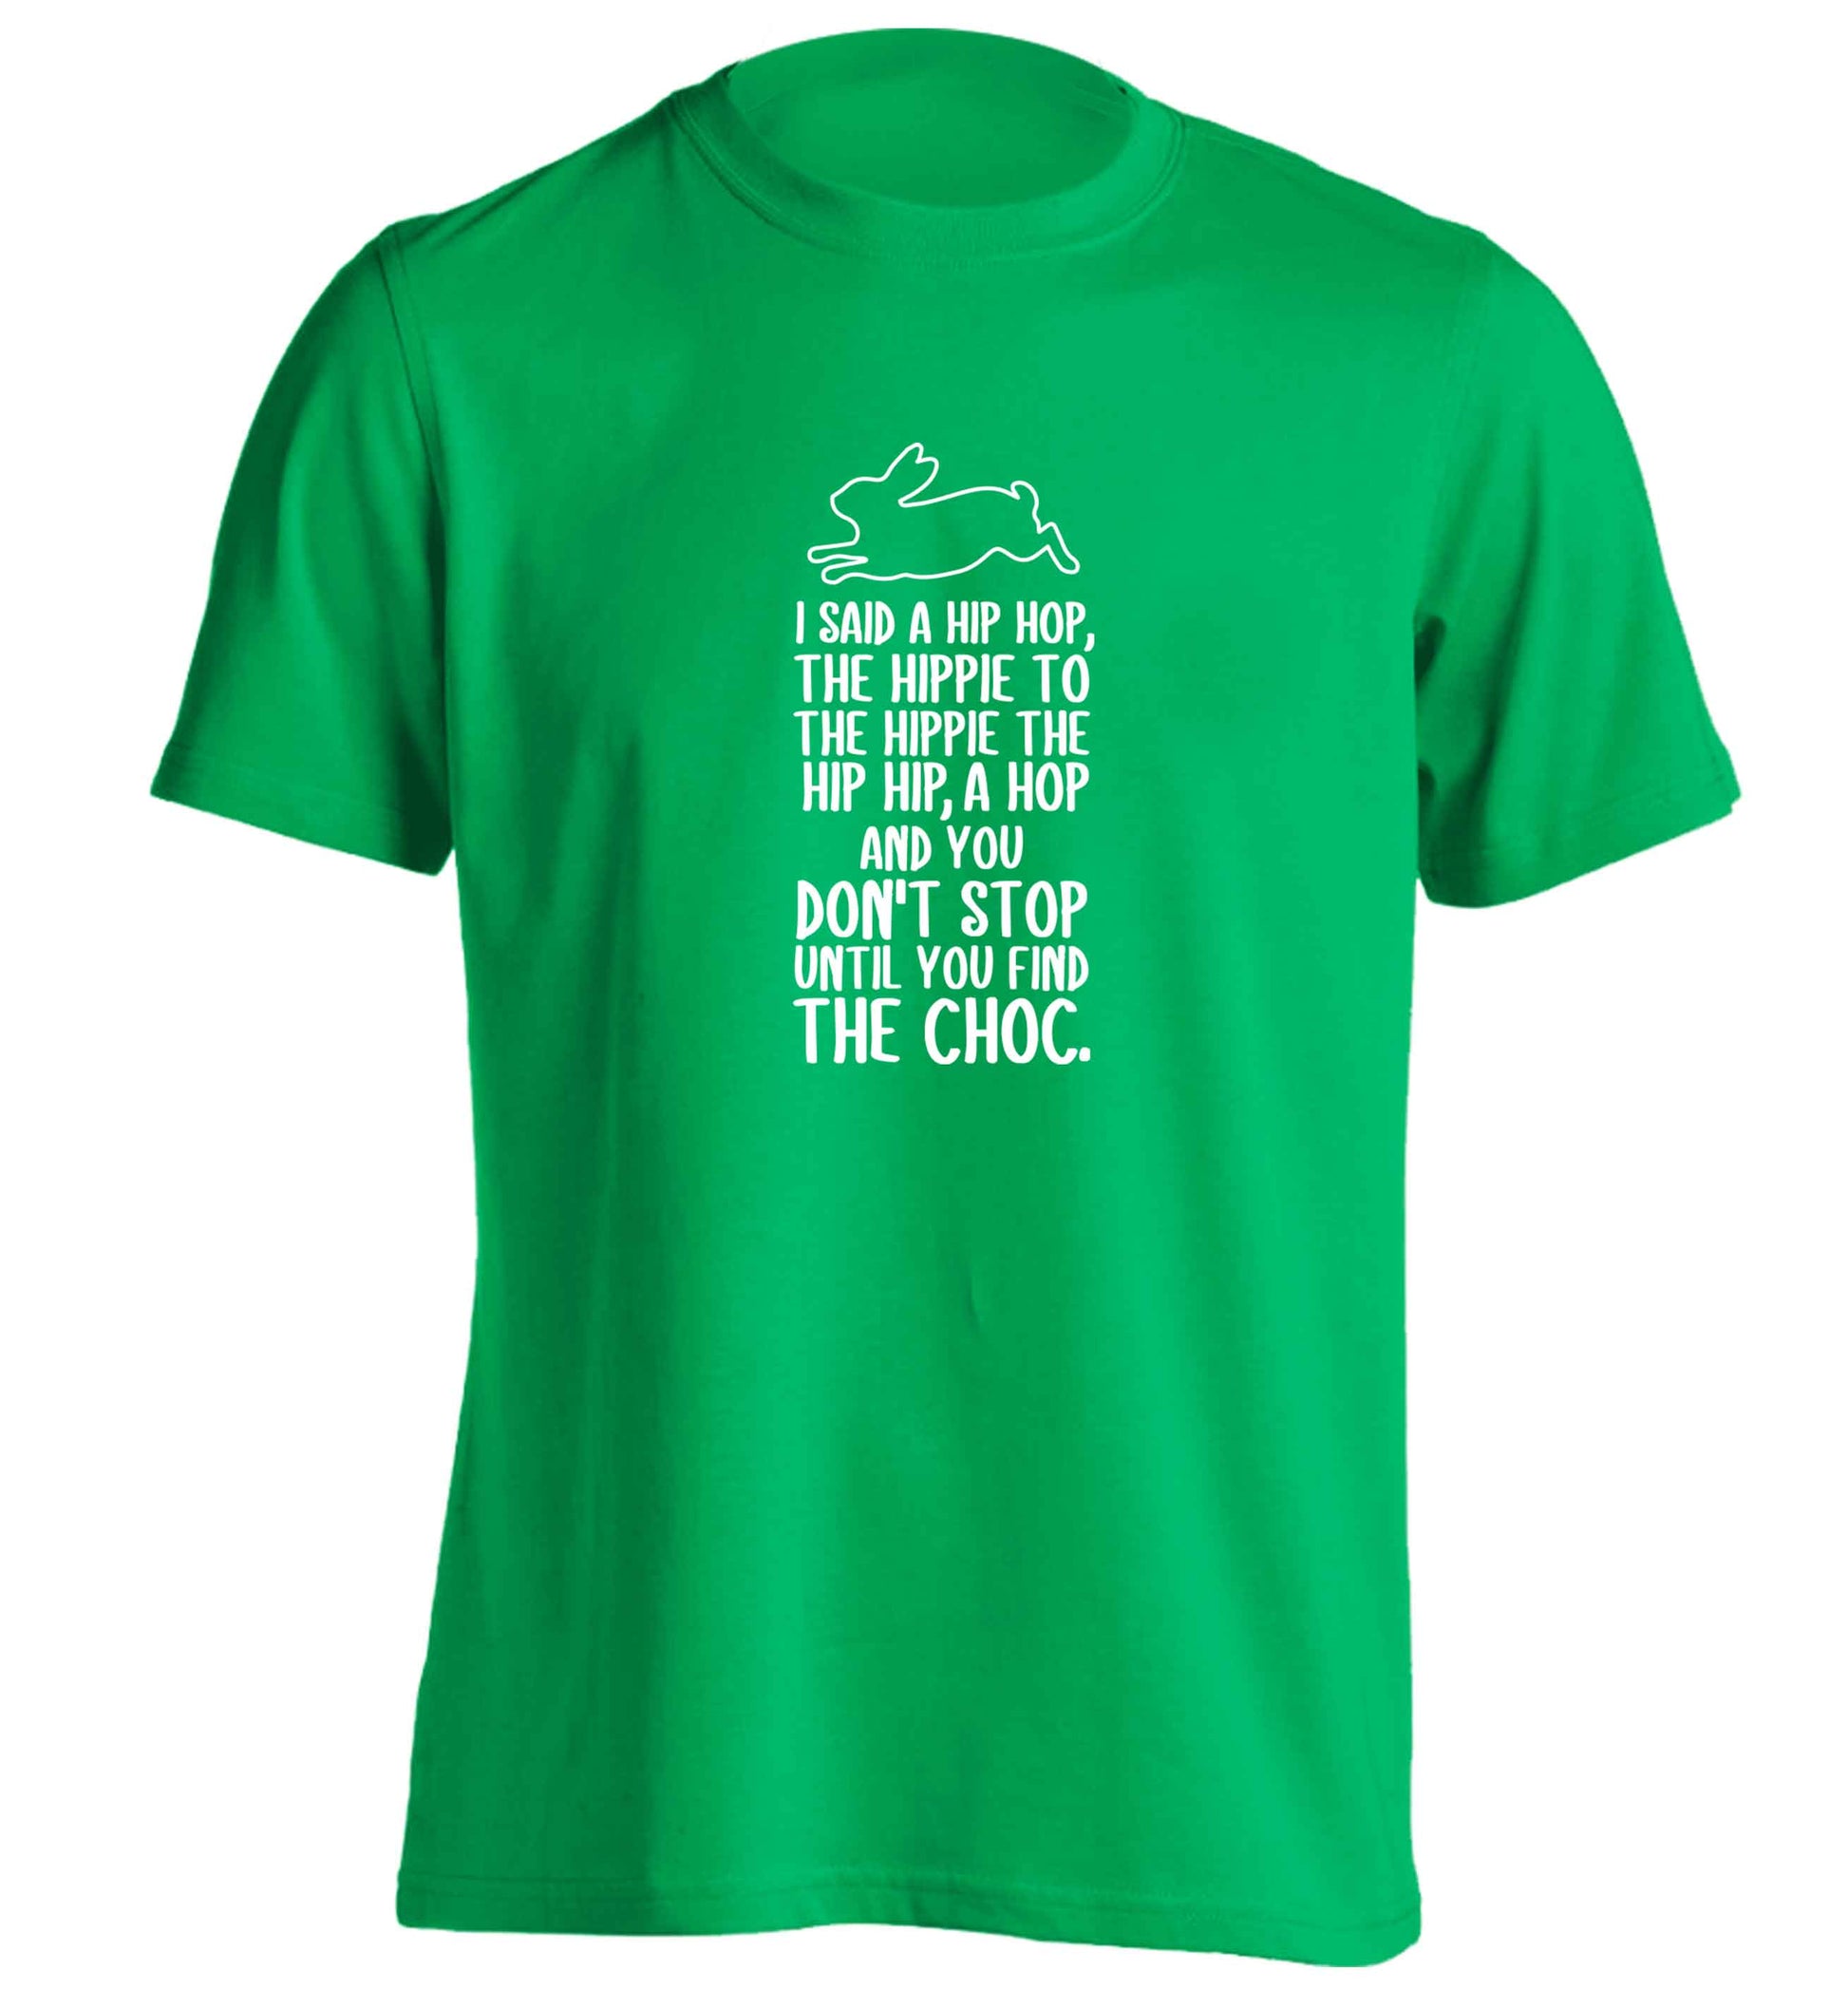 Don't stop until you find the choc adults unisex green Tshirt 2XL